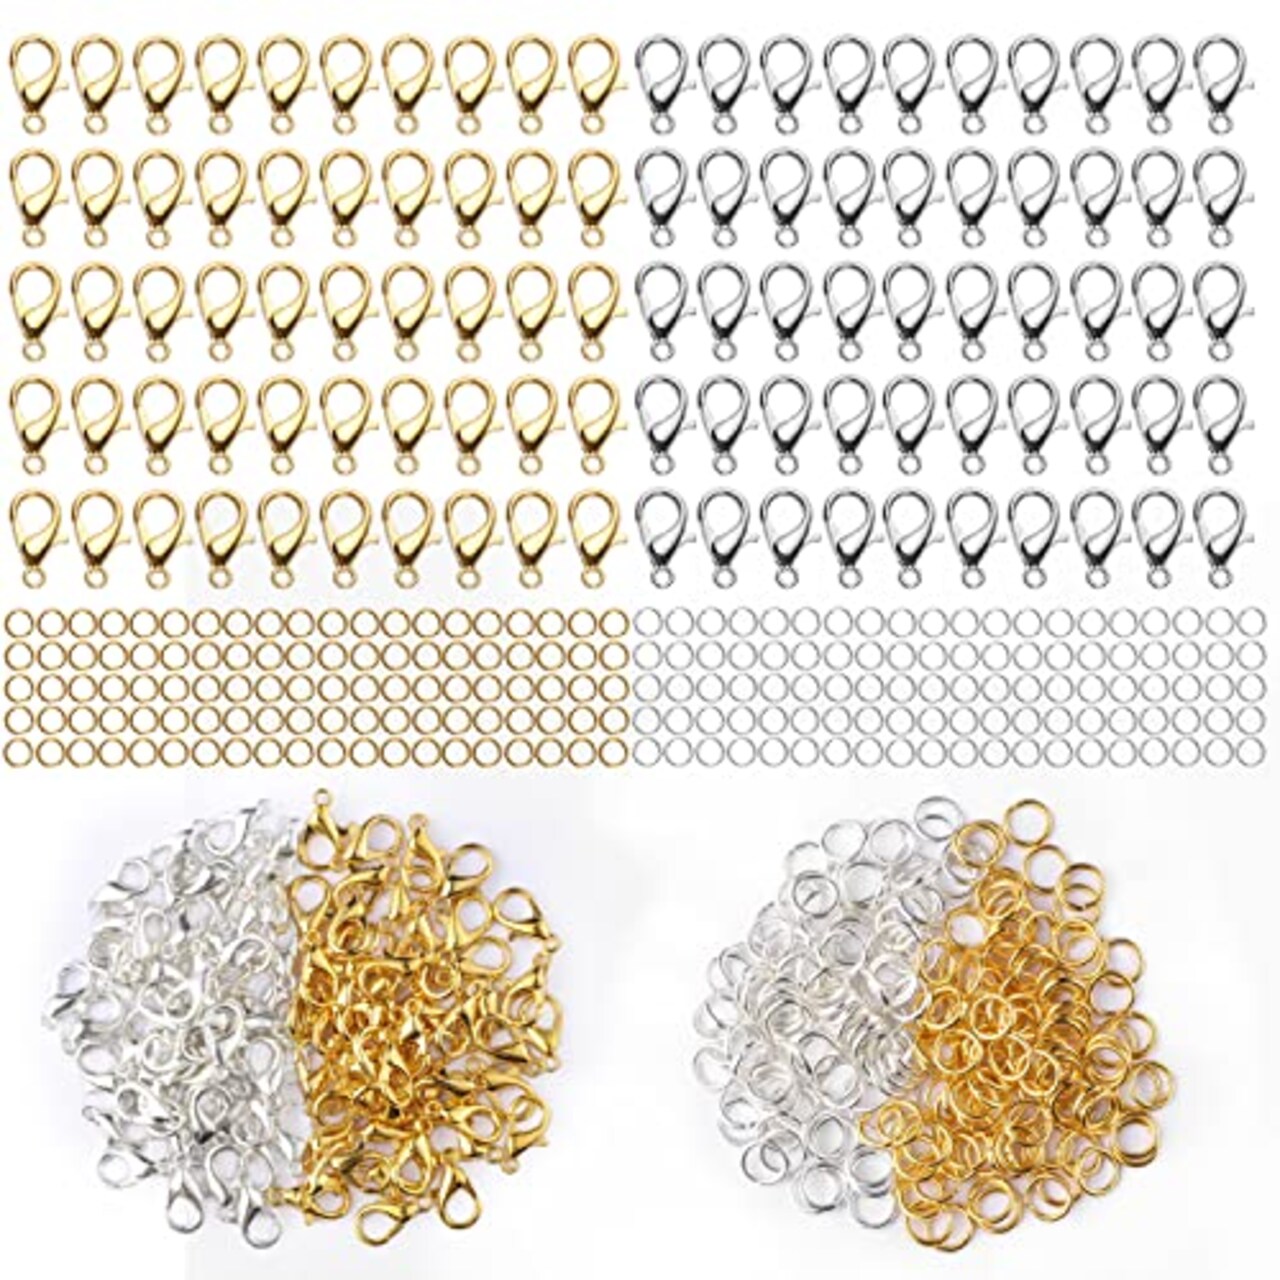 300 pcs Lobster Clasps and Open Jump Rings Set, Jewelry Clasps Lobster Claw  Clasps for Jewelry Making Findings&Bracelets Stocking Stuffers Christmas  Gifts(Gold, Silver)